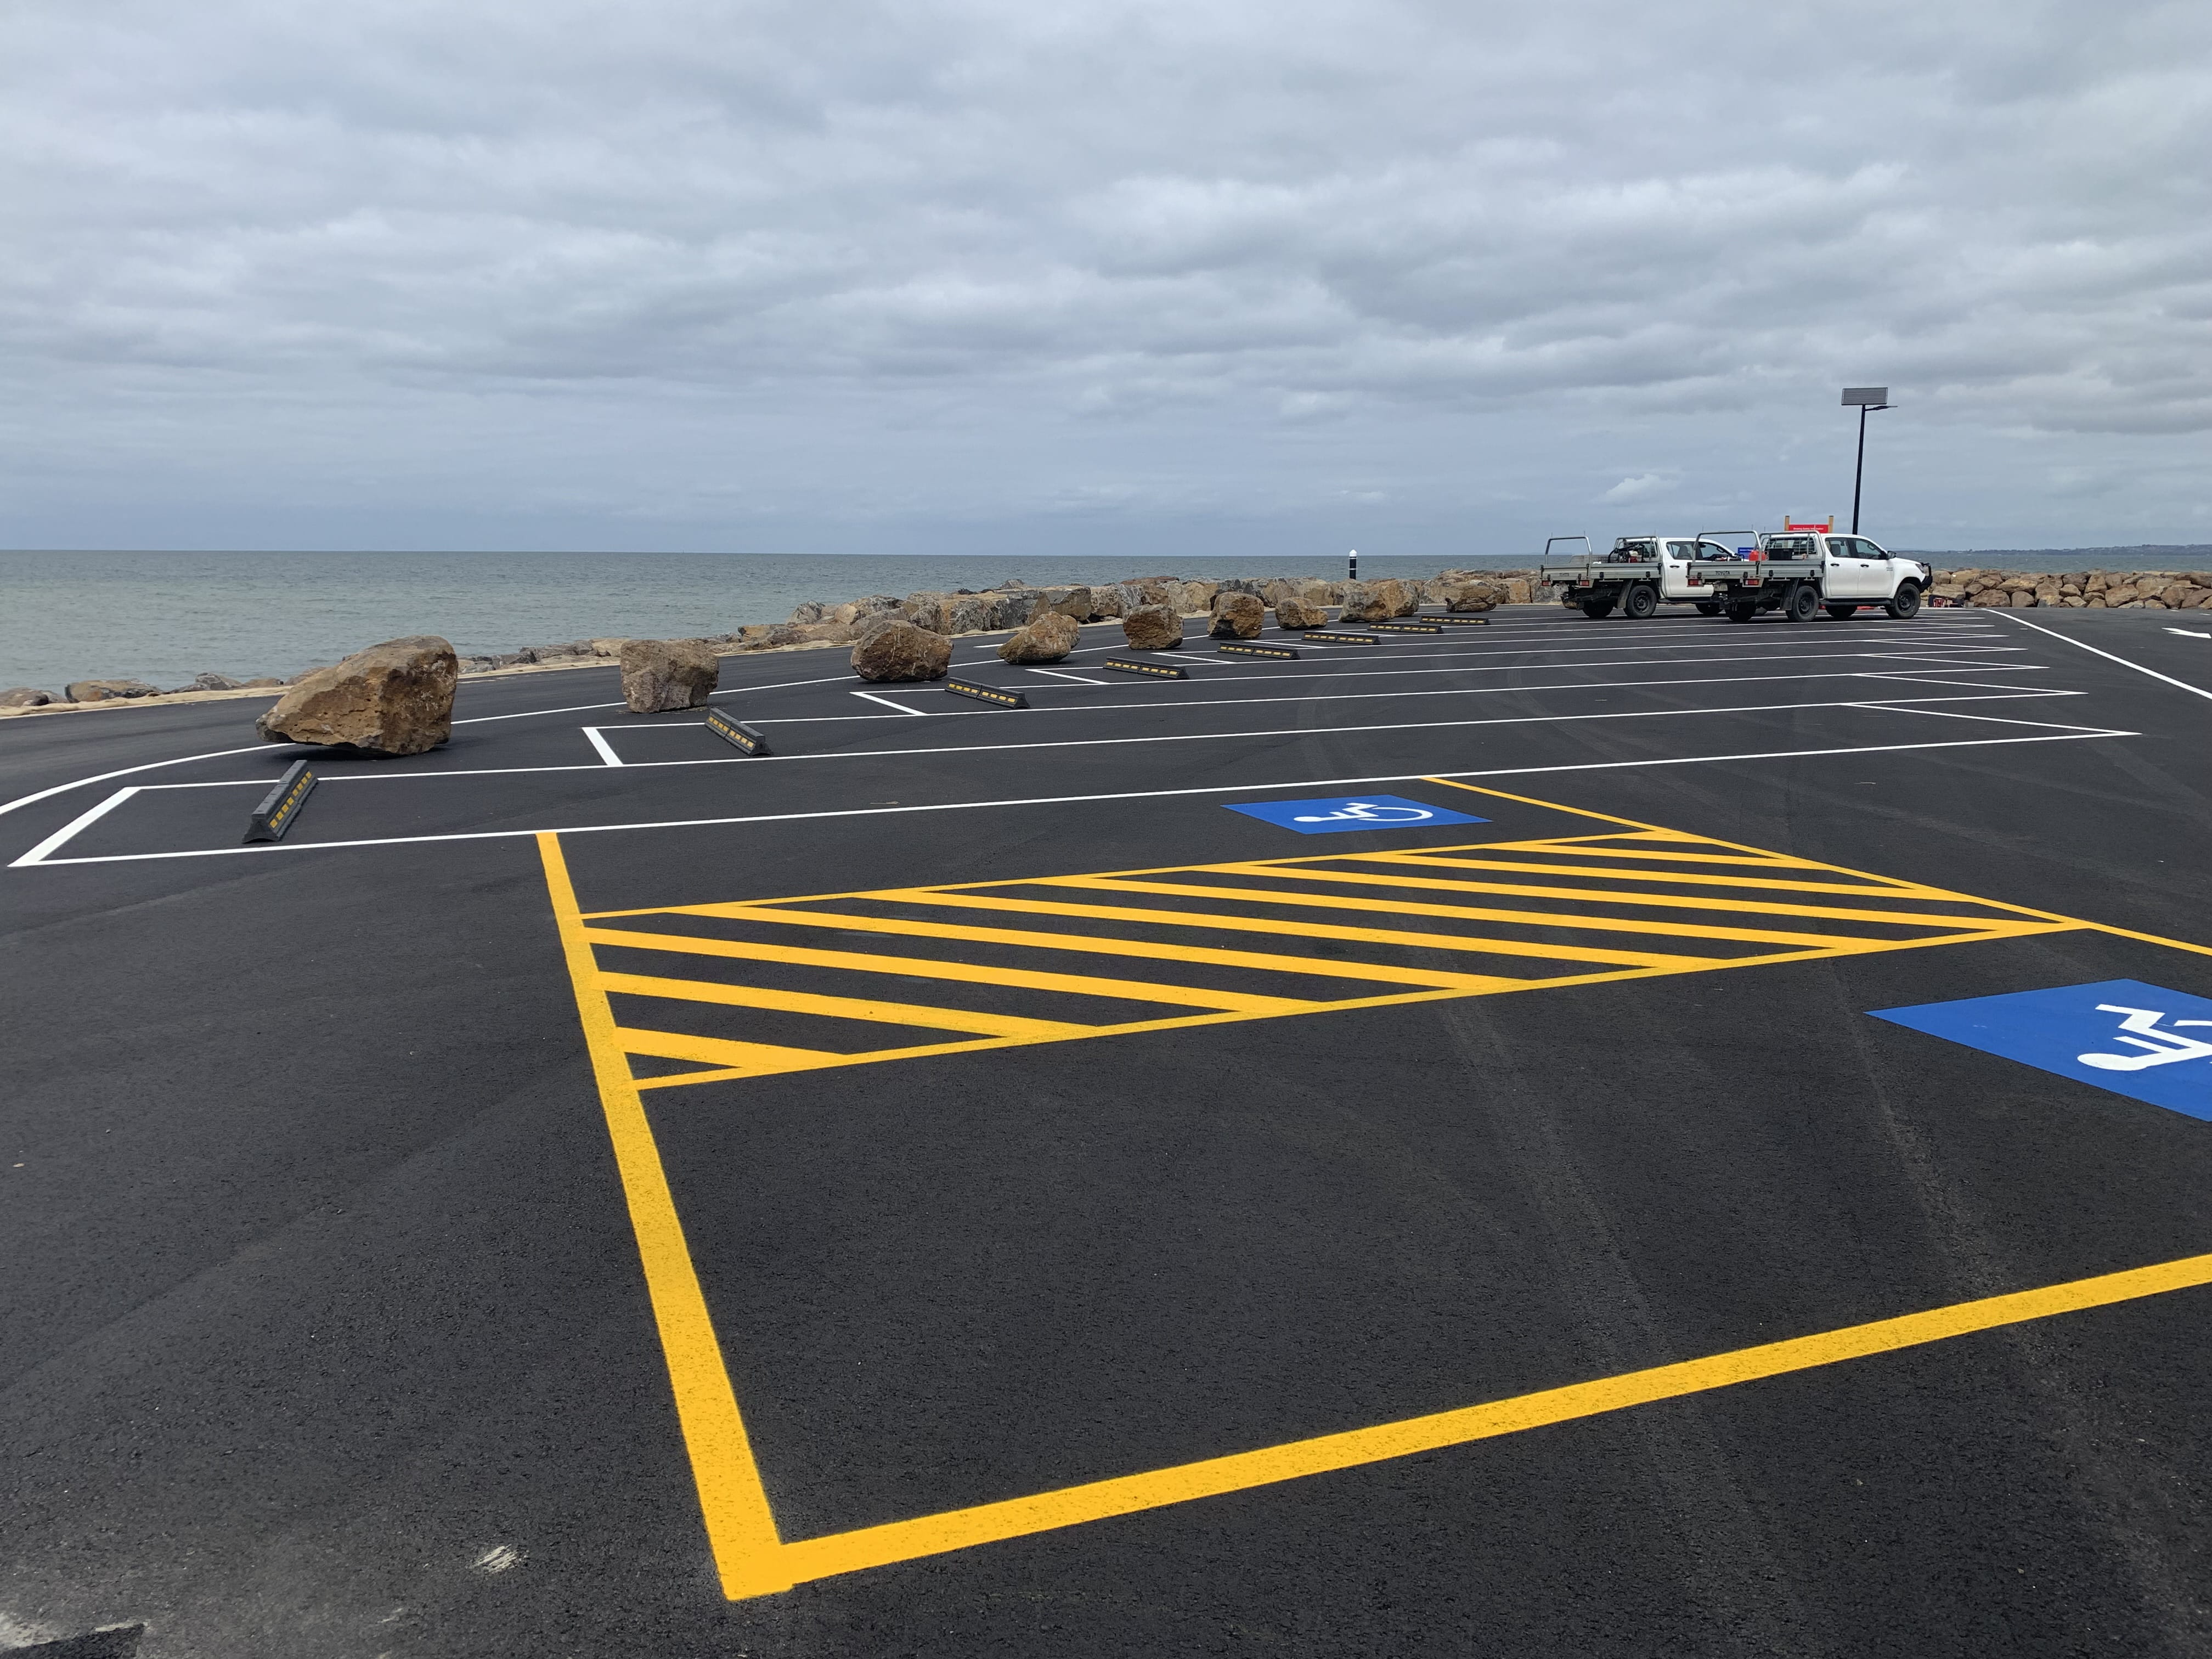 Long carparks for cars and boat trailers, and disability parking spaces